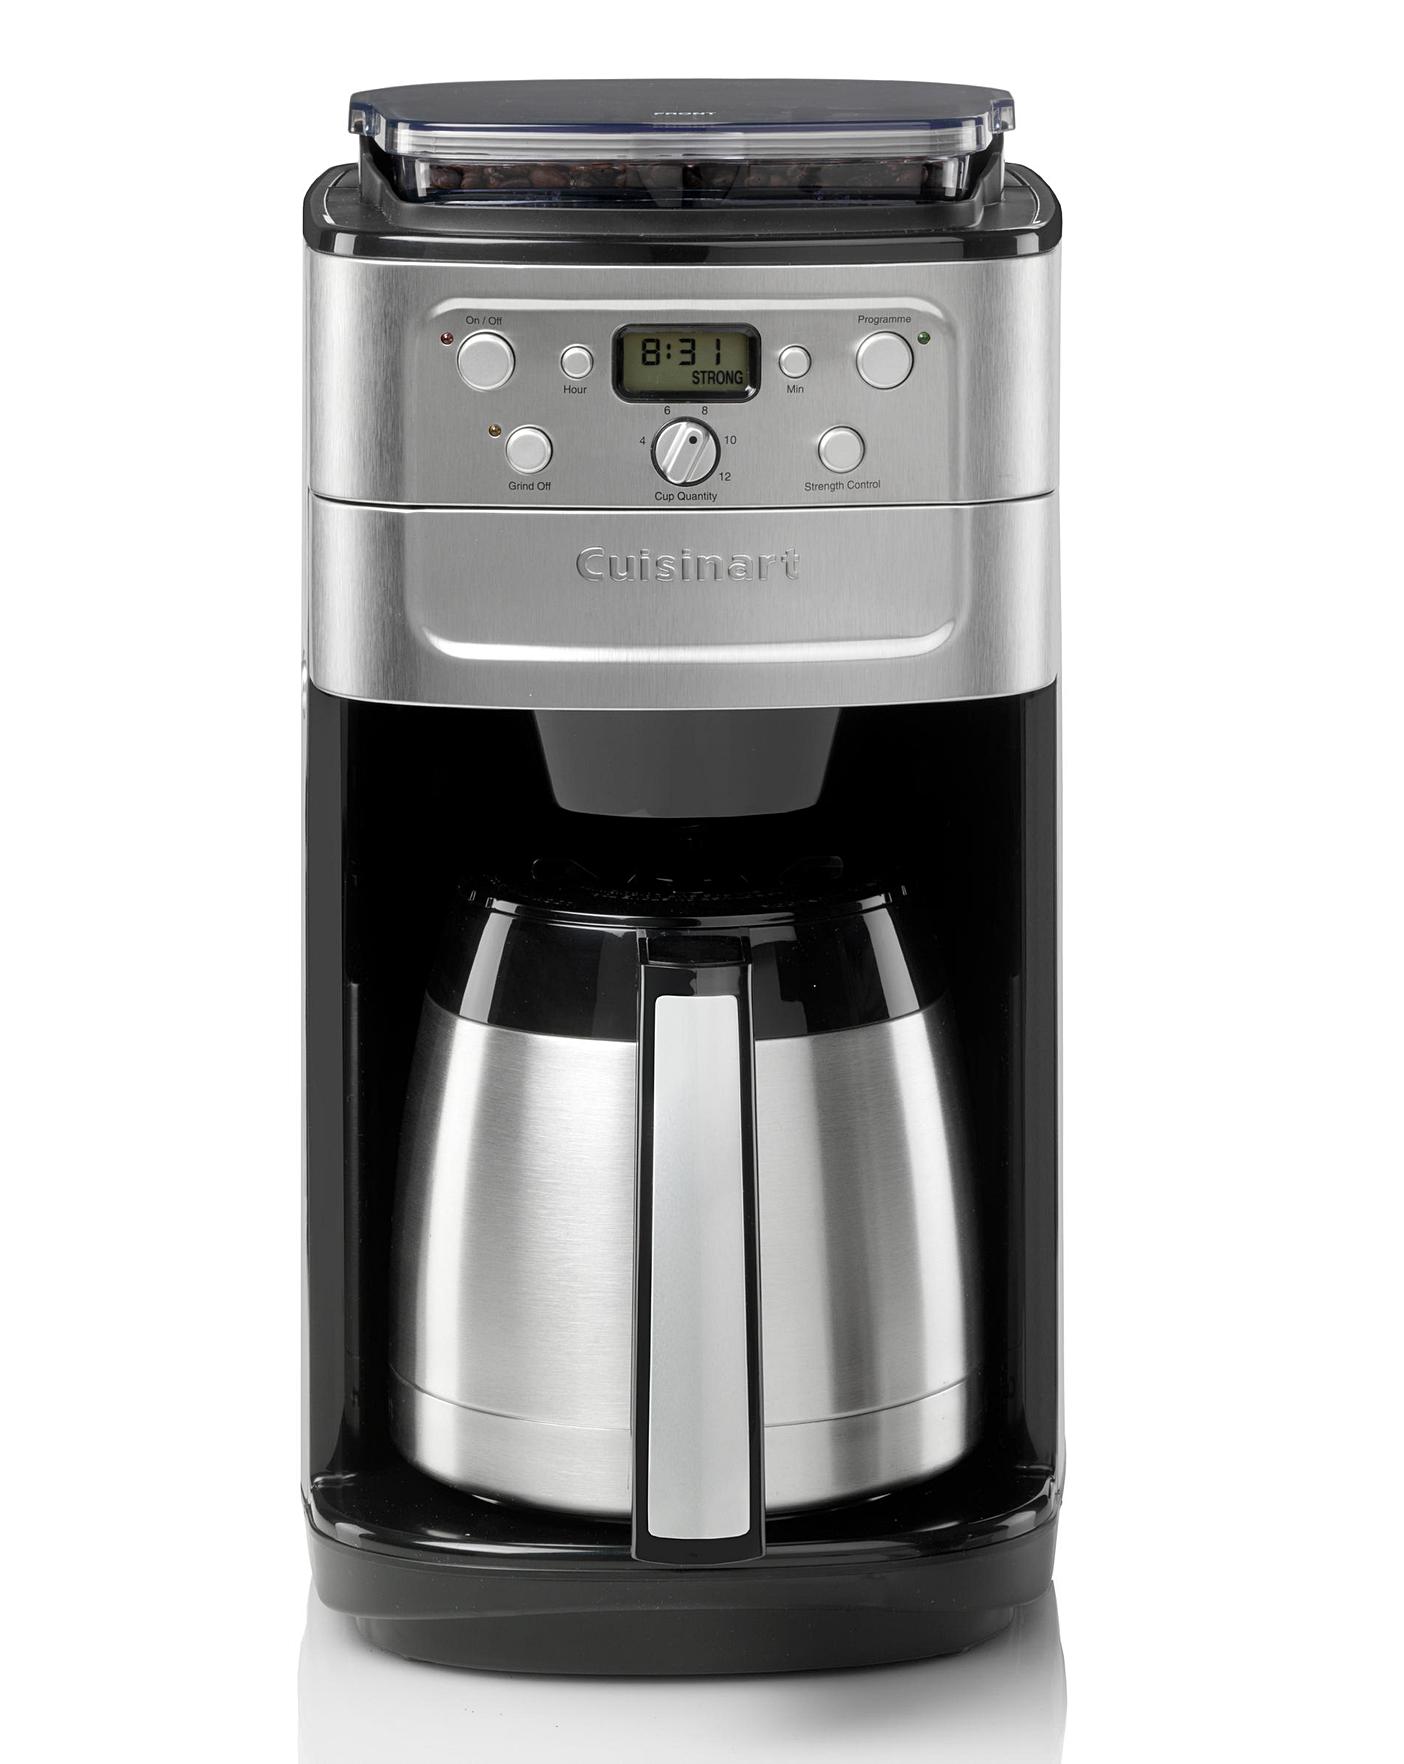 Cuisinart Coffee Maker Burr Grinder / The 10 Best Thermal